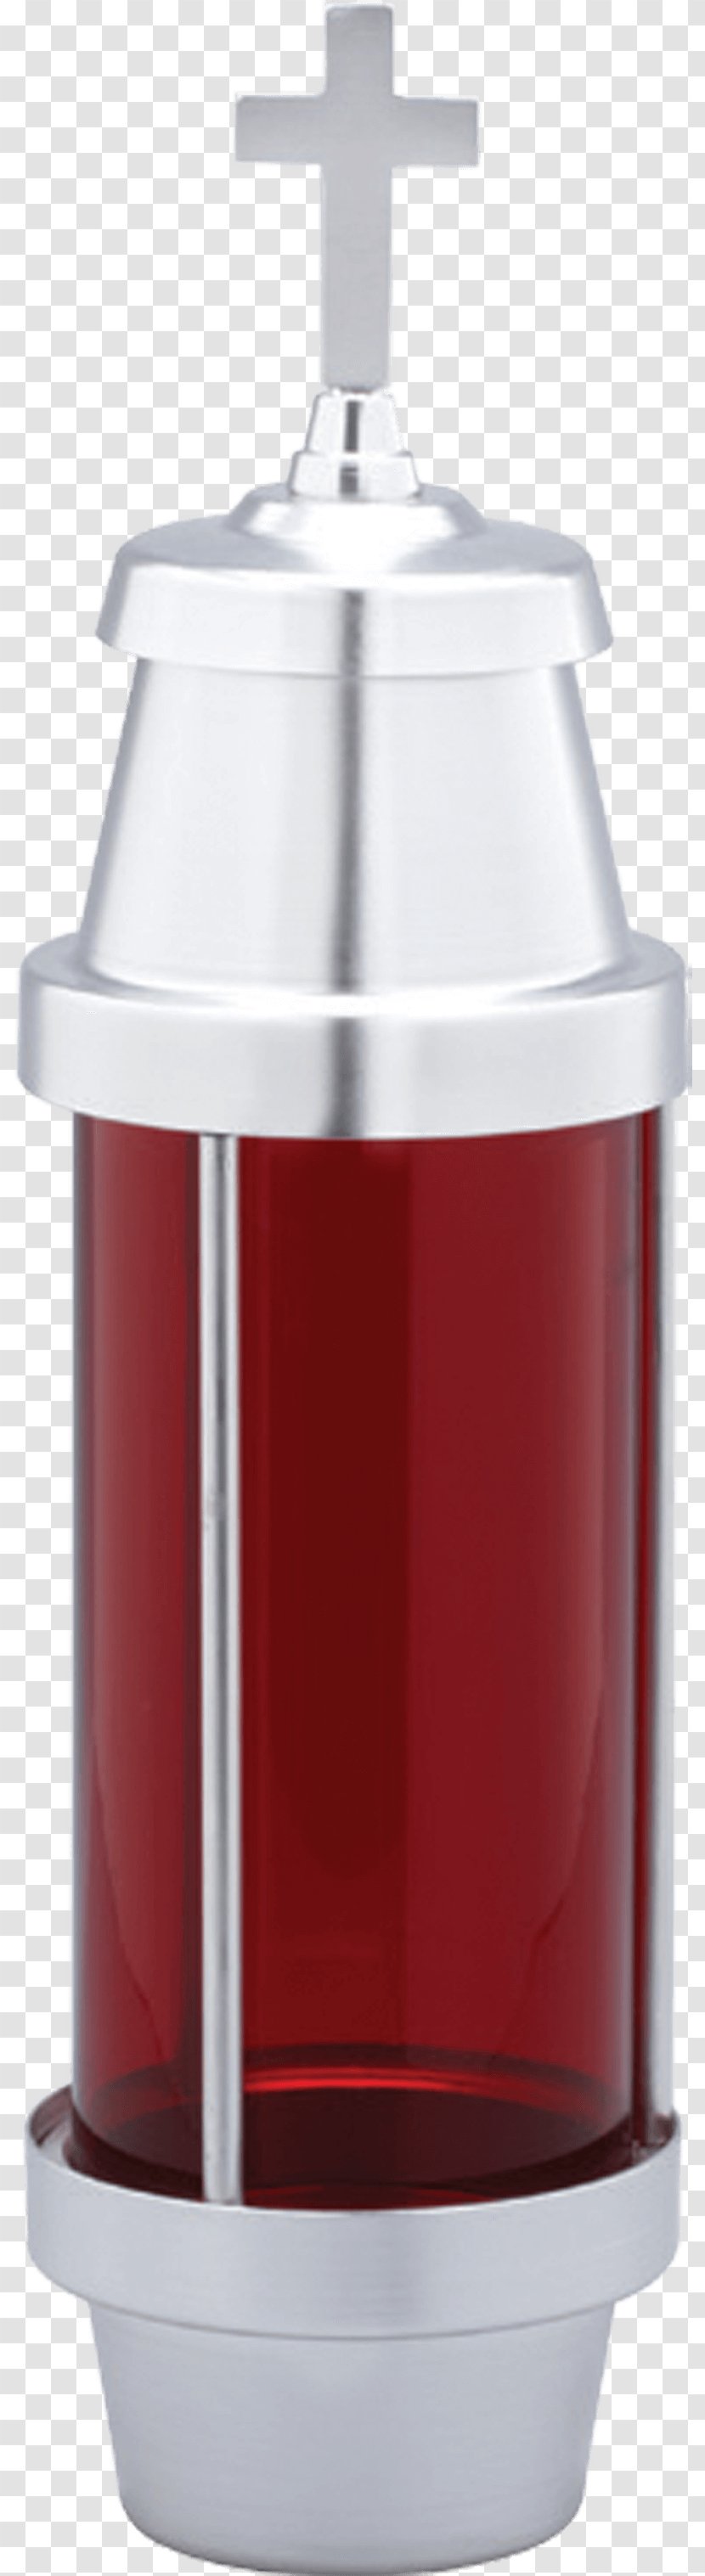 Kettle Tennessee Product Design - Tableware - Memorial Candles Cemetery Transparent PNG